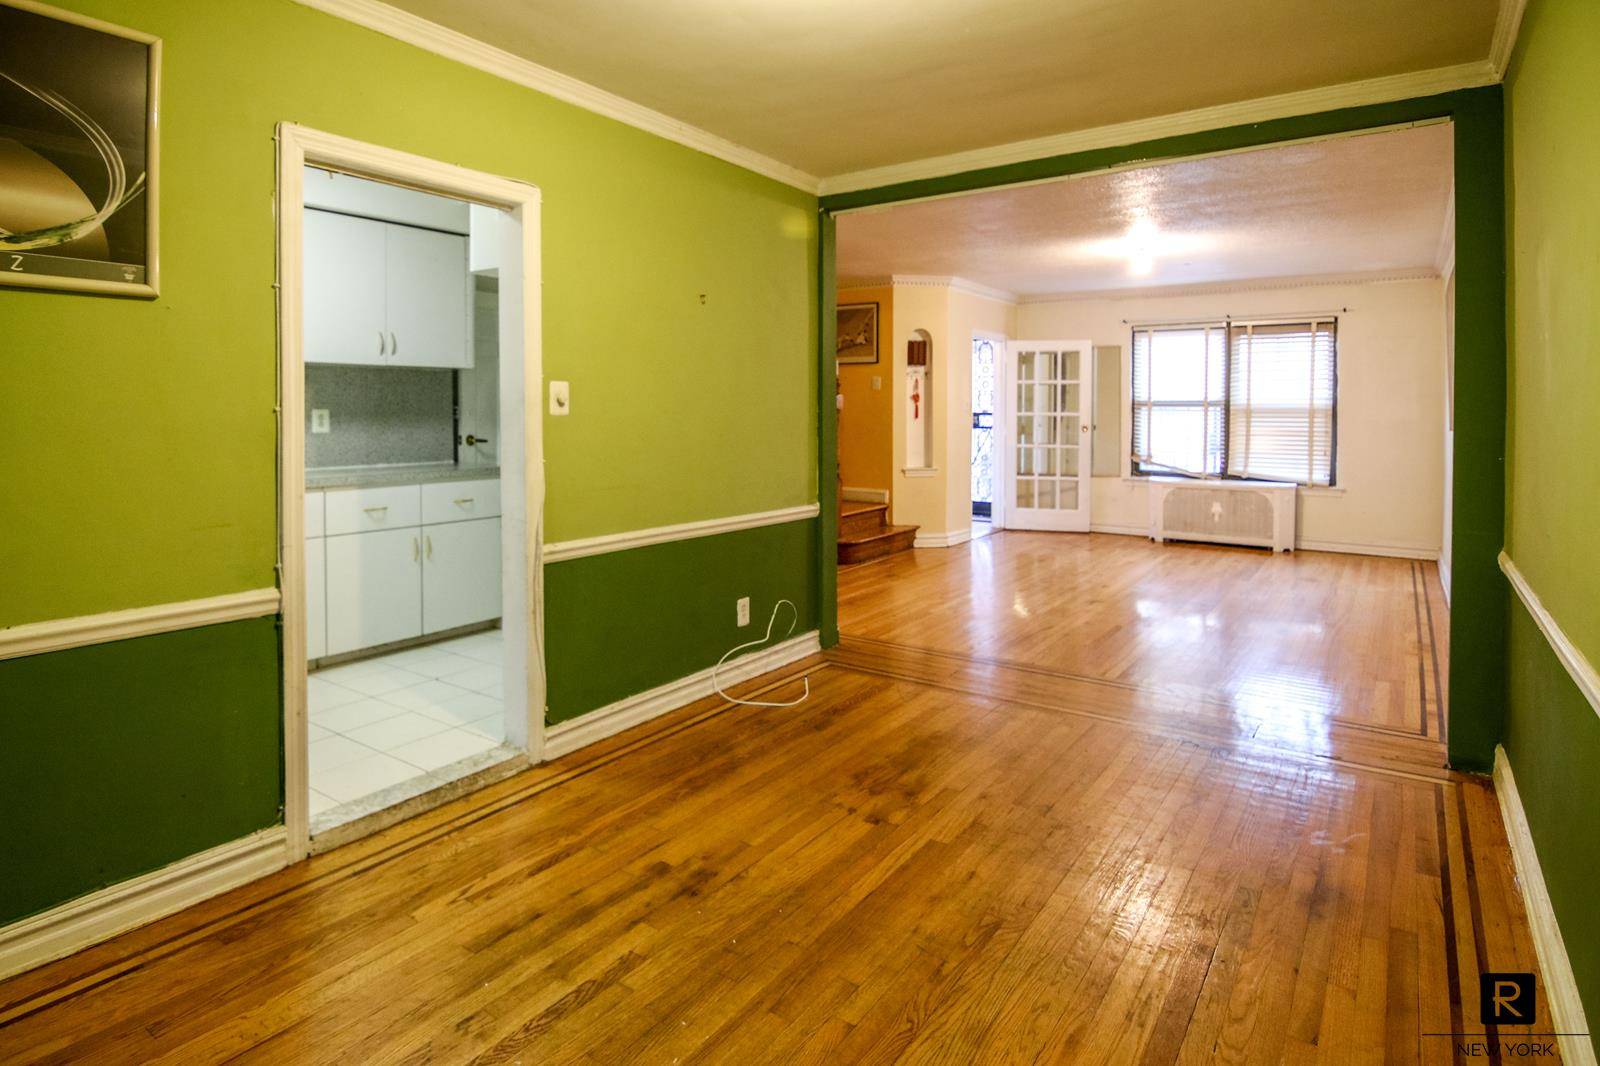 Whole house for rent ! Conveniently located close to 63rd Drive M, R trains.